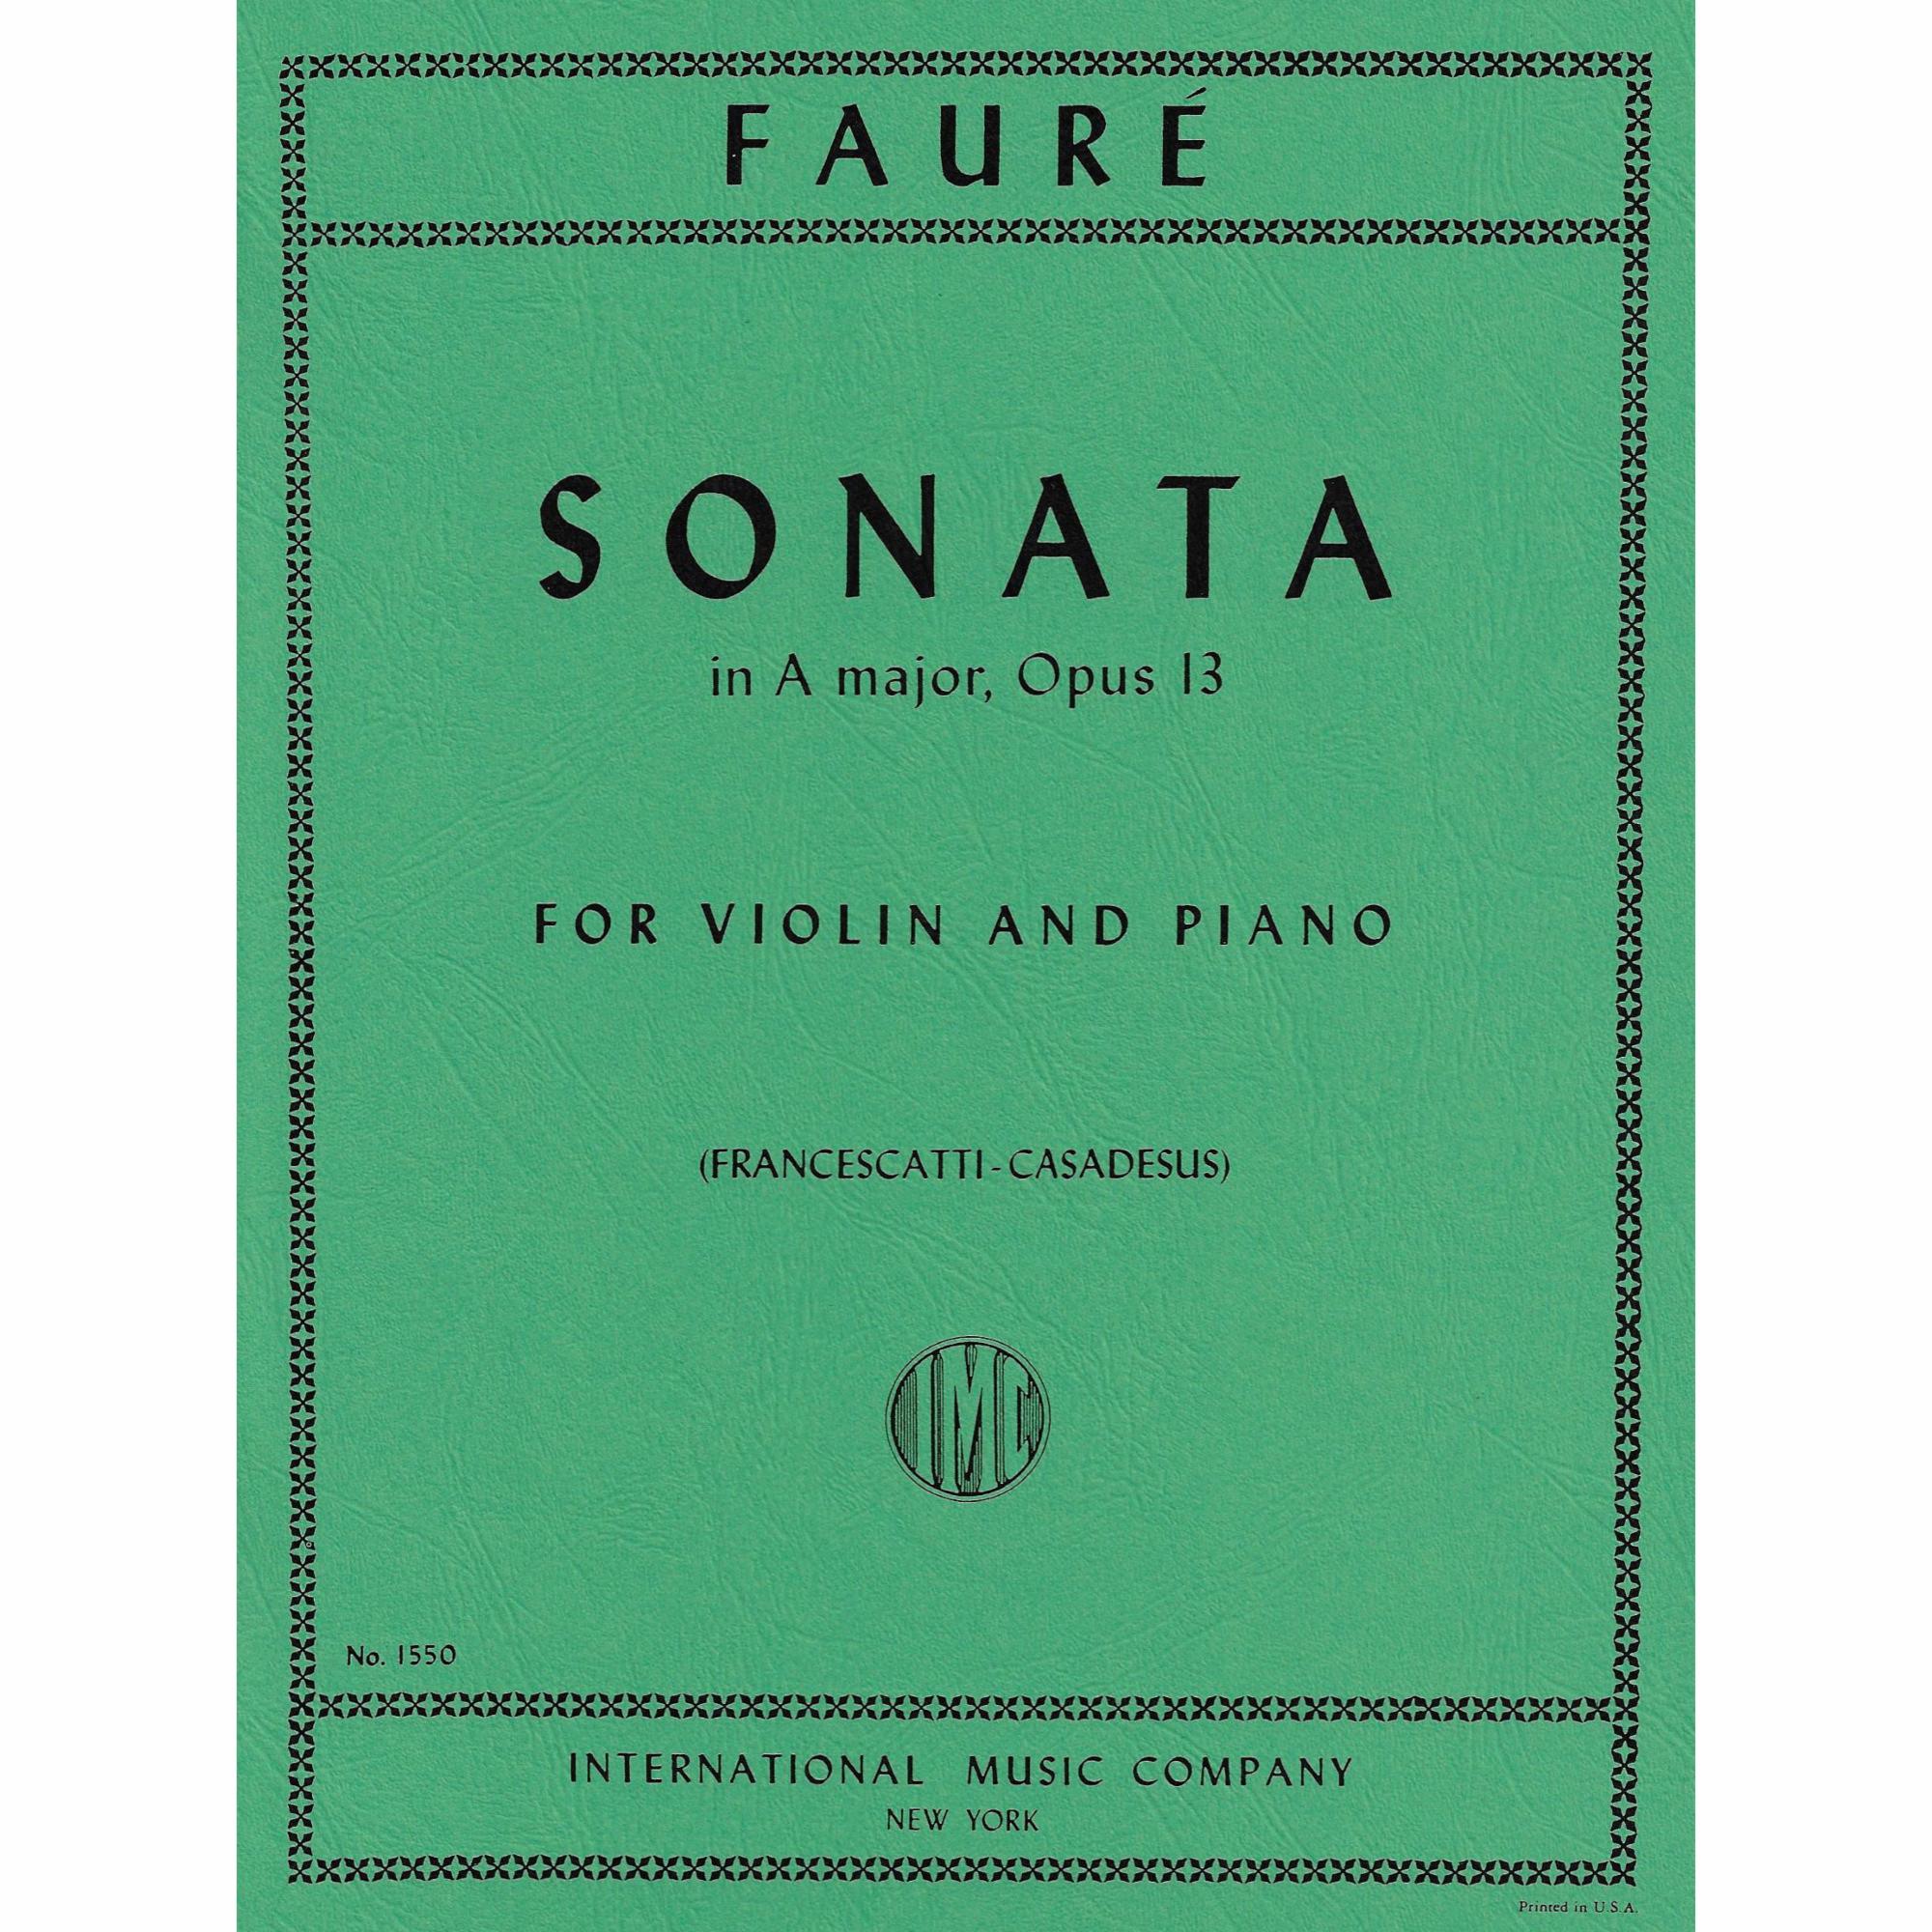 Faure -- Sonata in A Major, Op. 13 for Violin and Piano